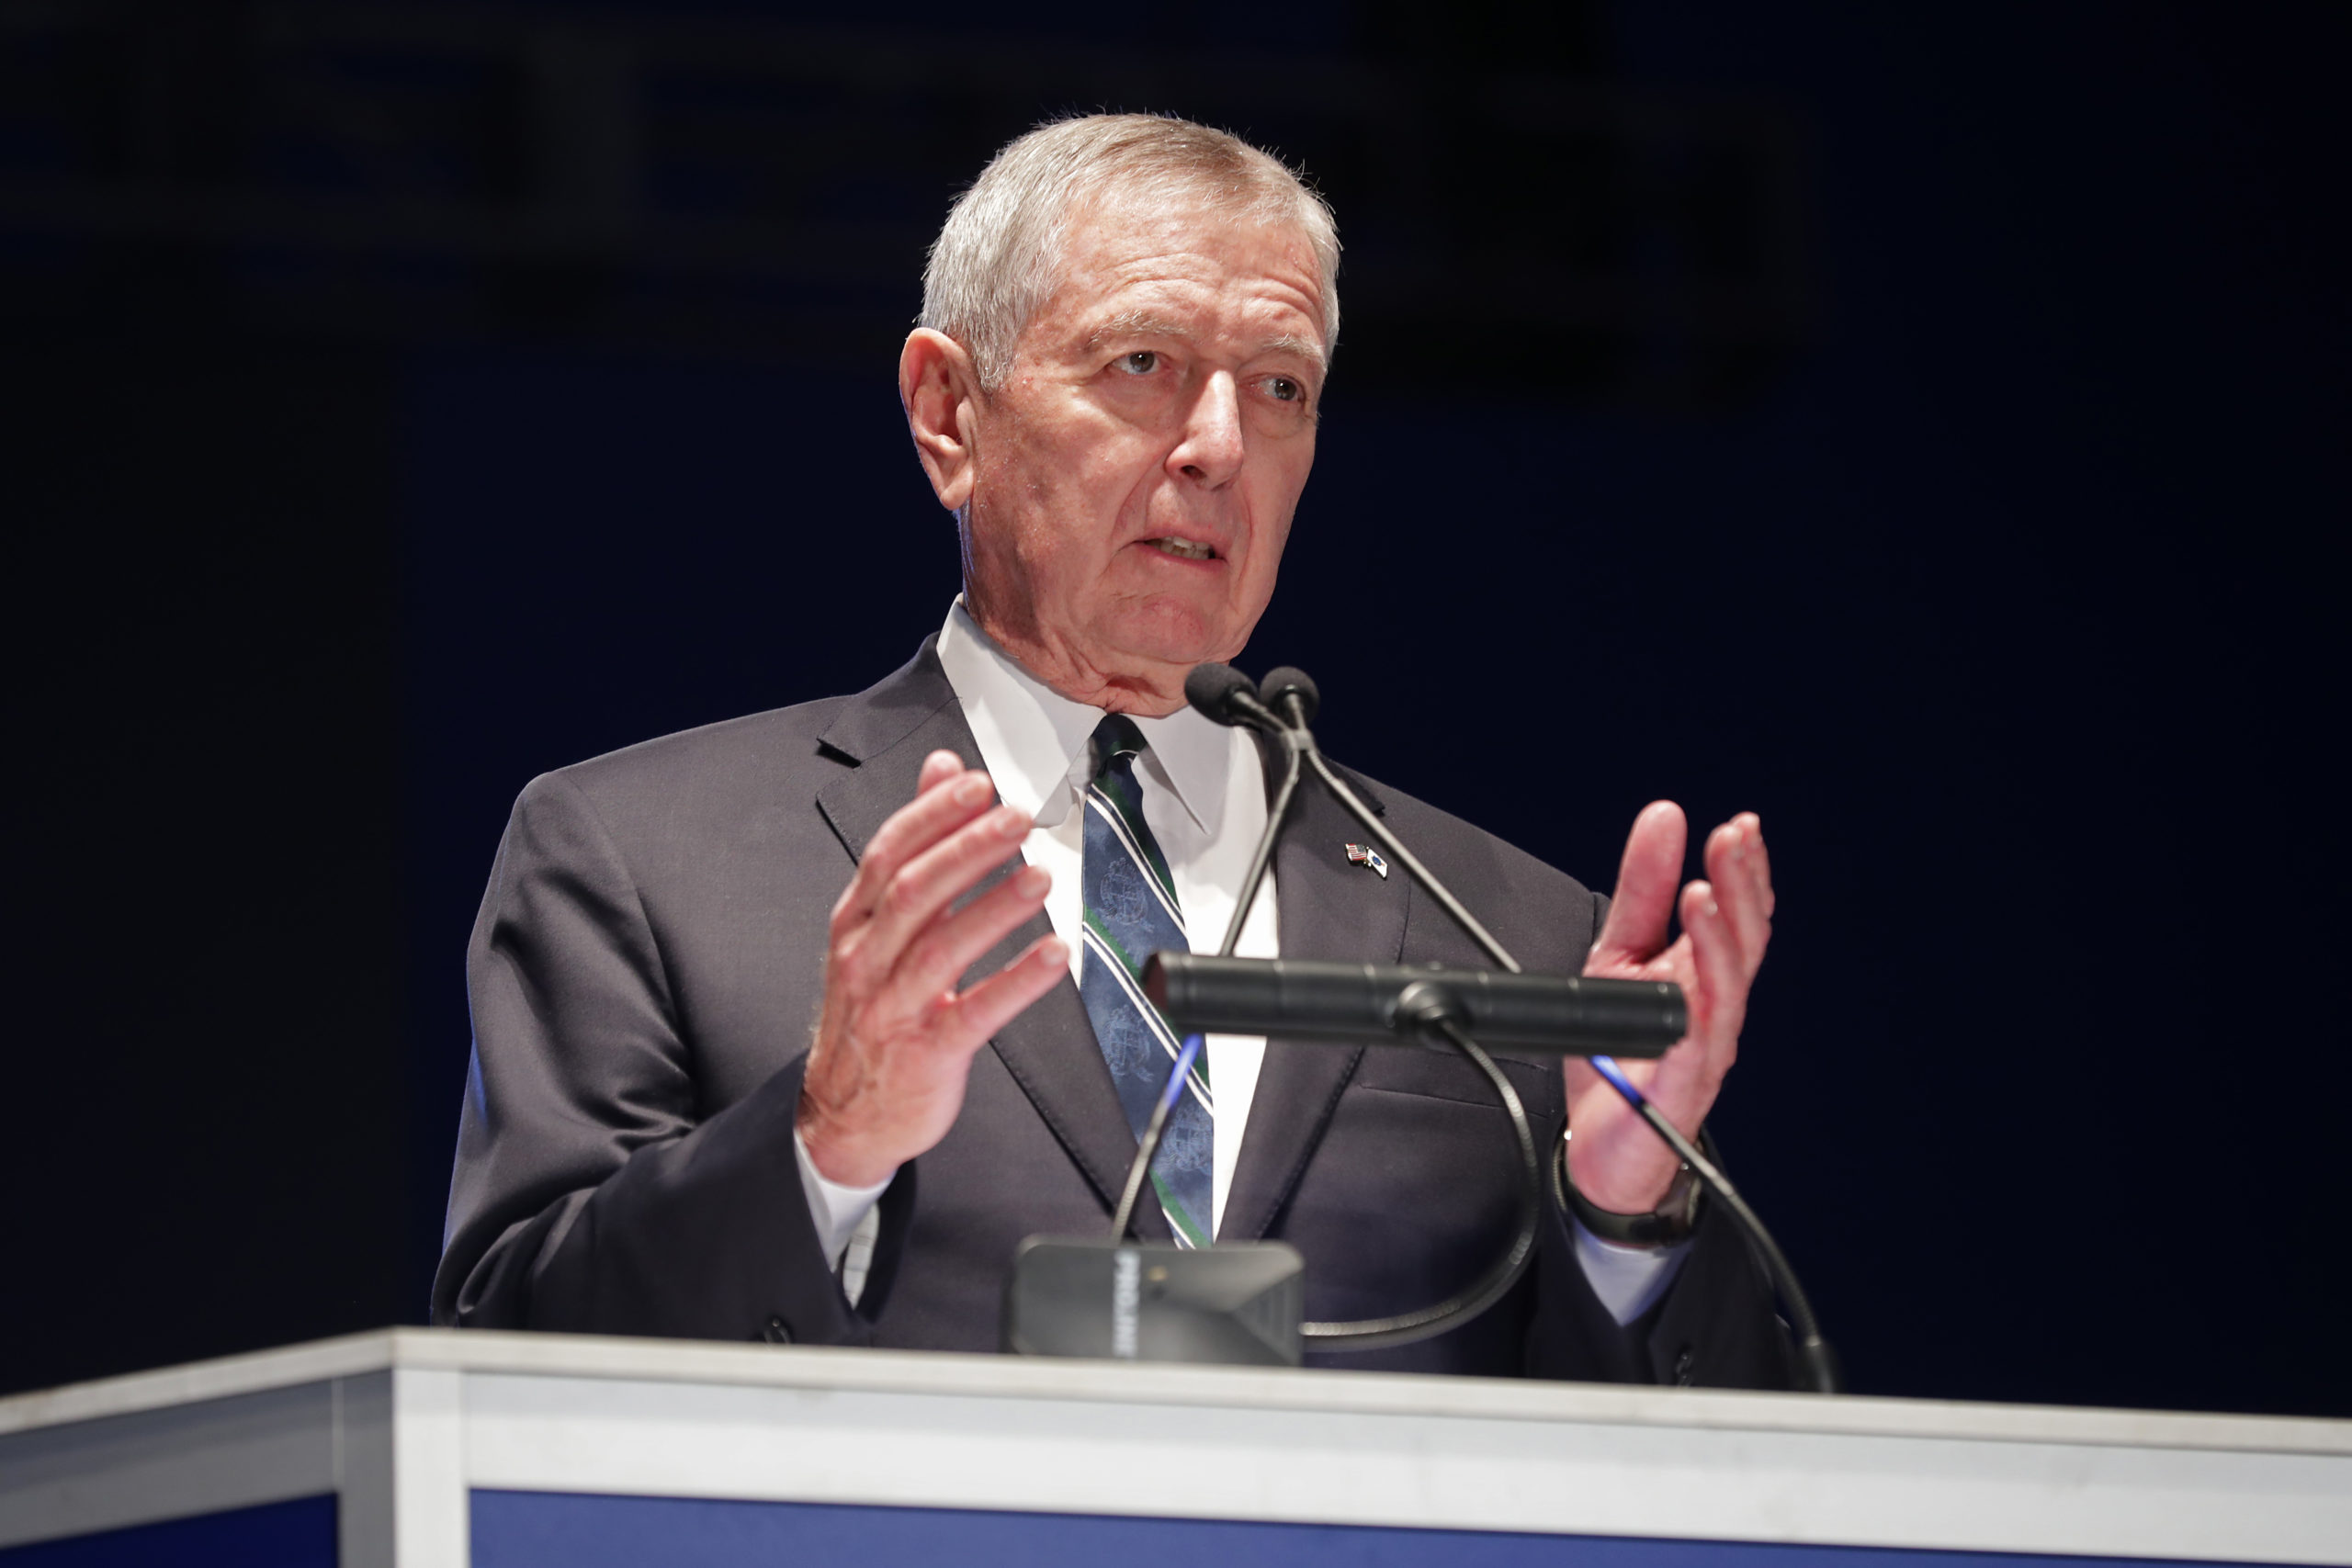 WASHINGTON, DC - MAY 13: Former U.S. Attorney General John Ashcroft delivers remarks during the National Police Week 31st Annual Candlelight Vigil on the National Mall May 13, 2019 in Washington, DC. Thousands of law enforcement officers, their supporters and family members of those officers who have died in the line of duty gathered on the National Mall to remember and honor them. (Photo by Chip Somodevilla/Getty Images)